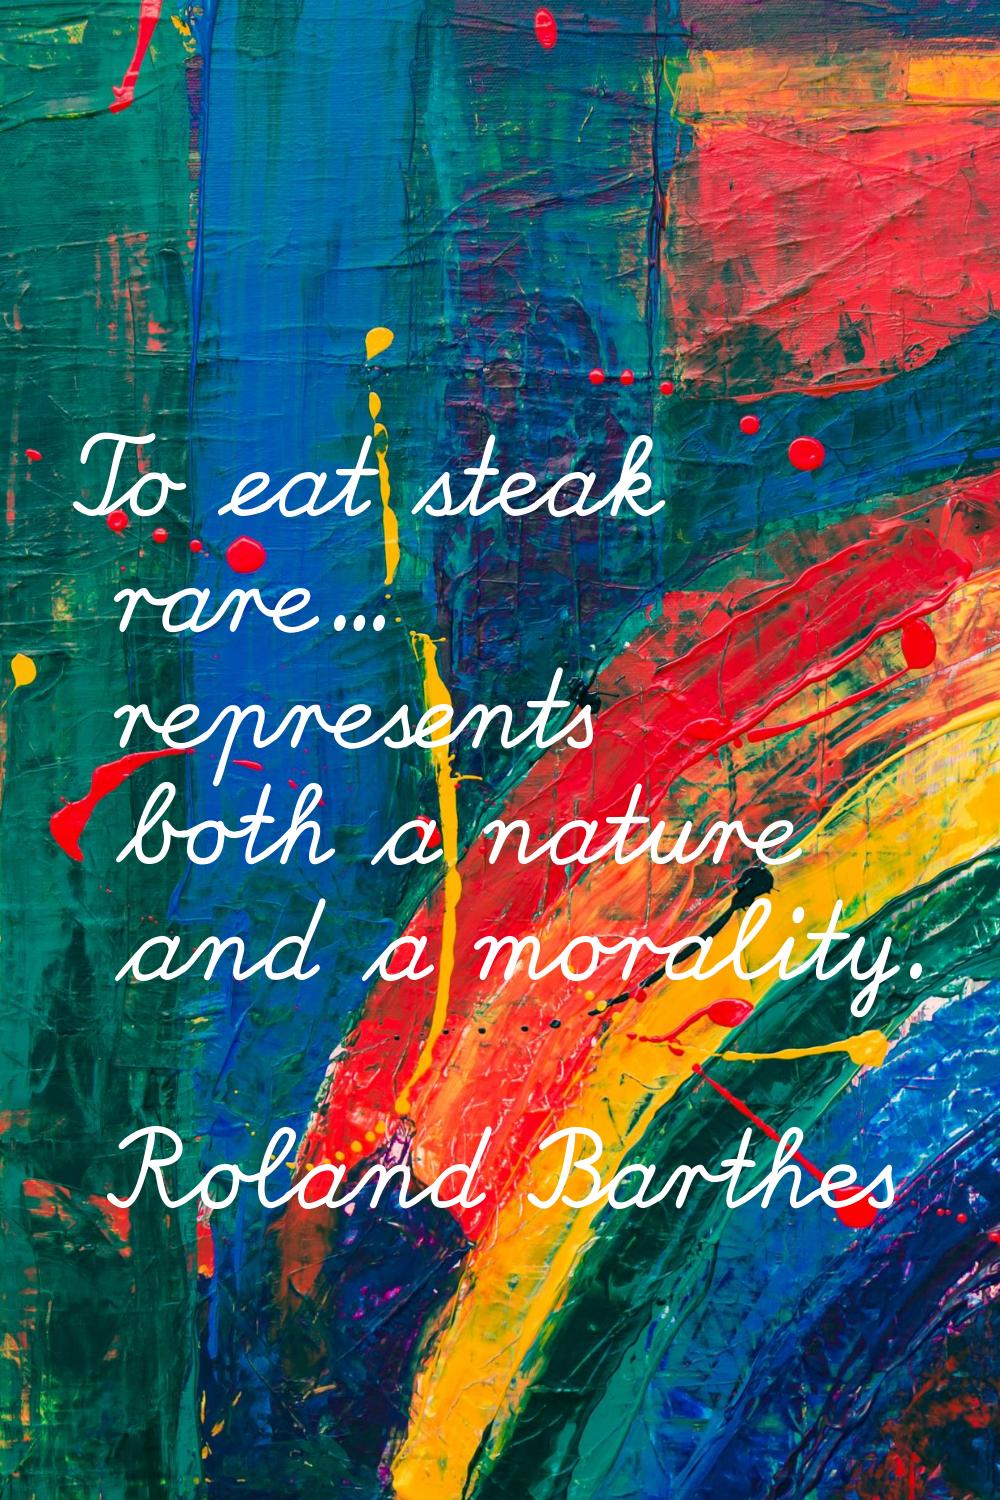 To eat steak rare... represents both a nature and a morality.